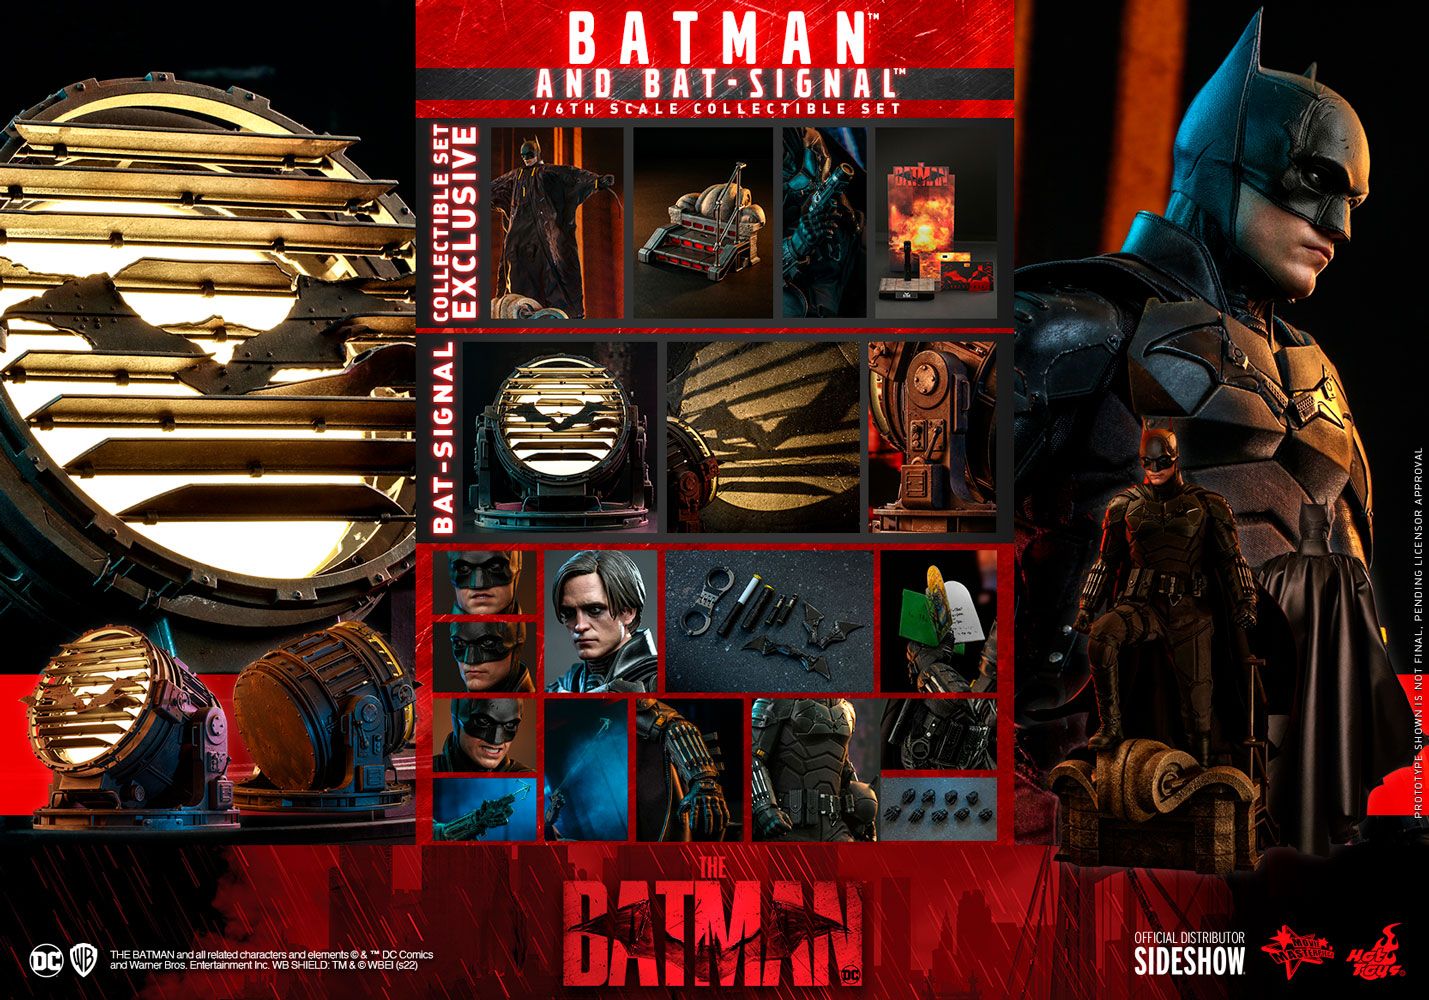 The Batman and Bat Signal DC Comics Gallery by Sideshow Collectibles